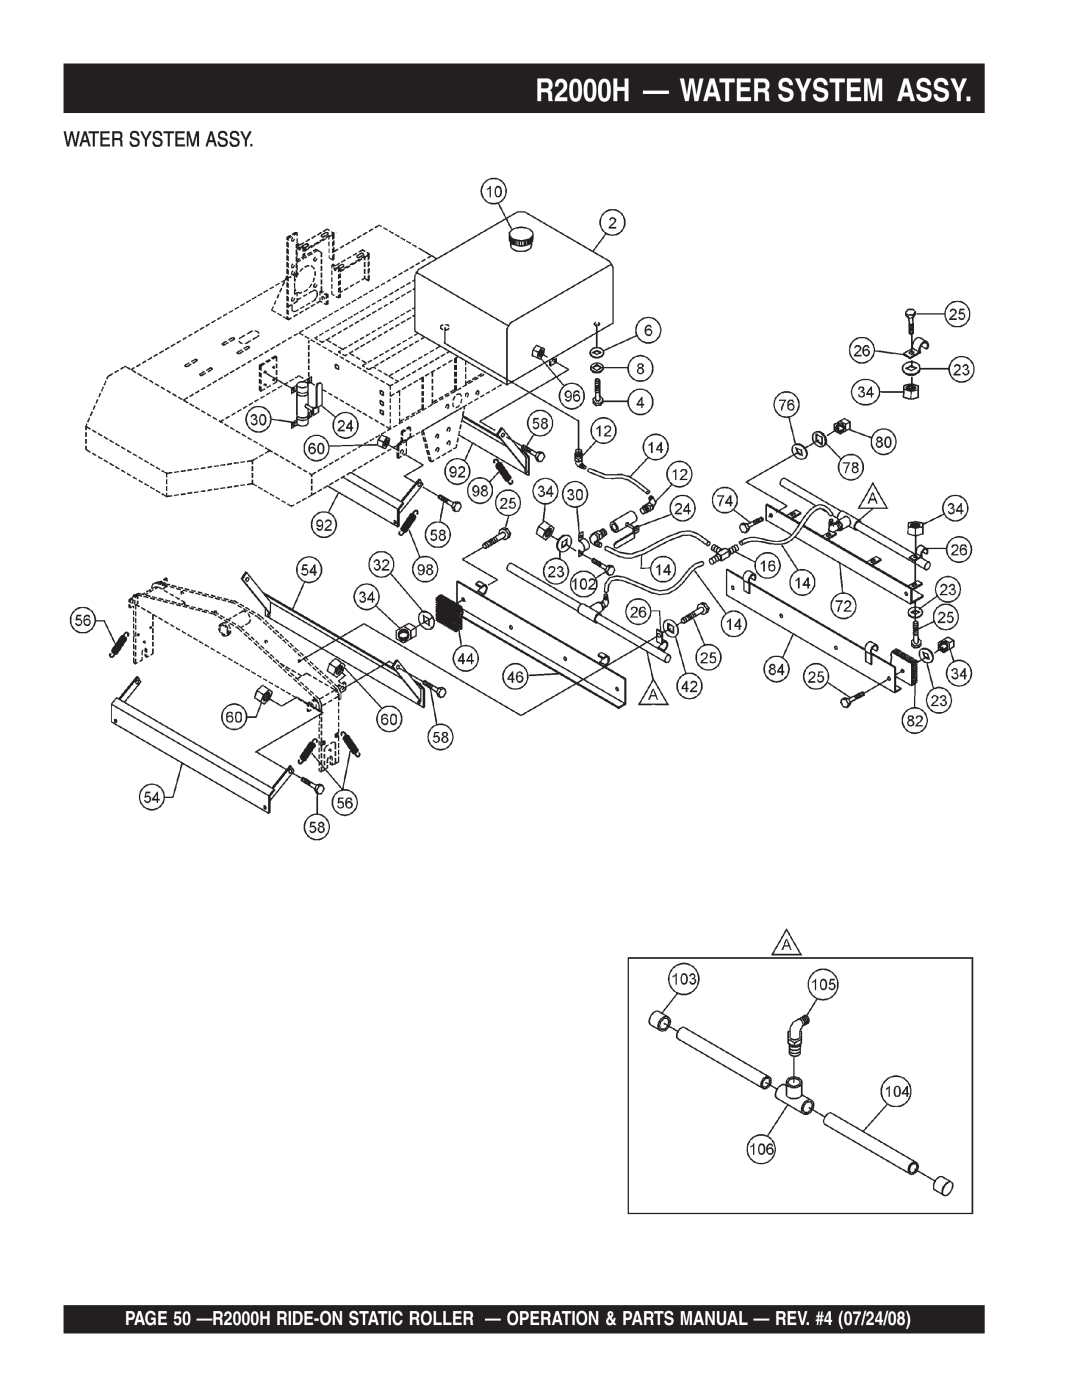 Multiquip manual R2000H - WATER SYSTEM ASSY, Water System Assy 